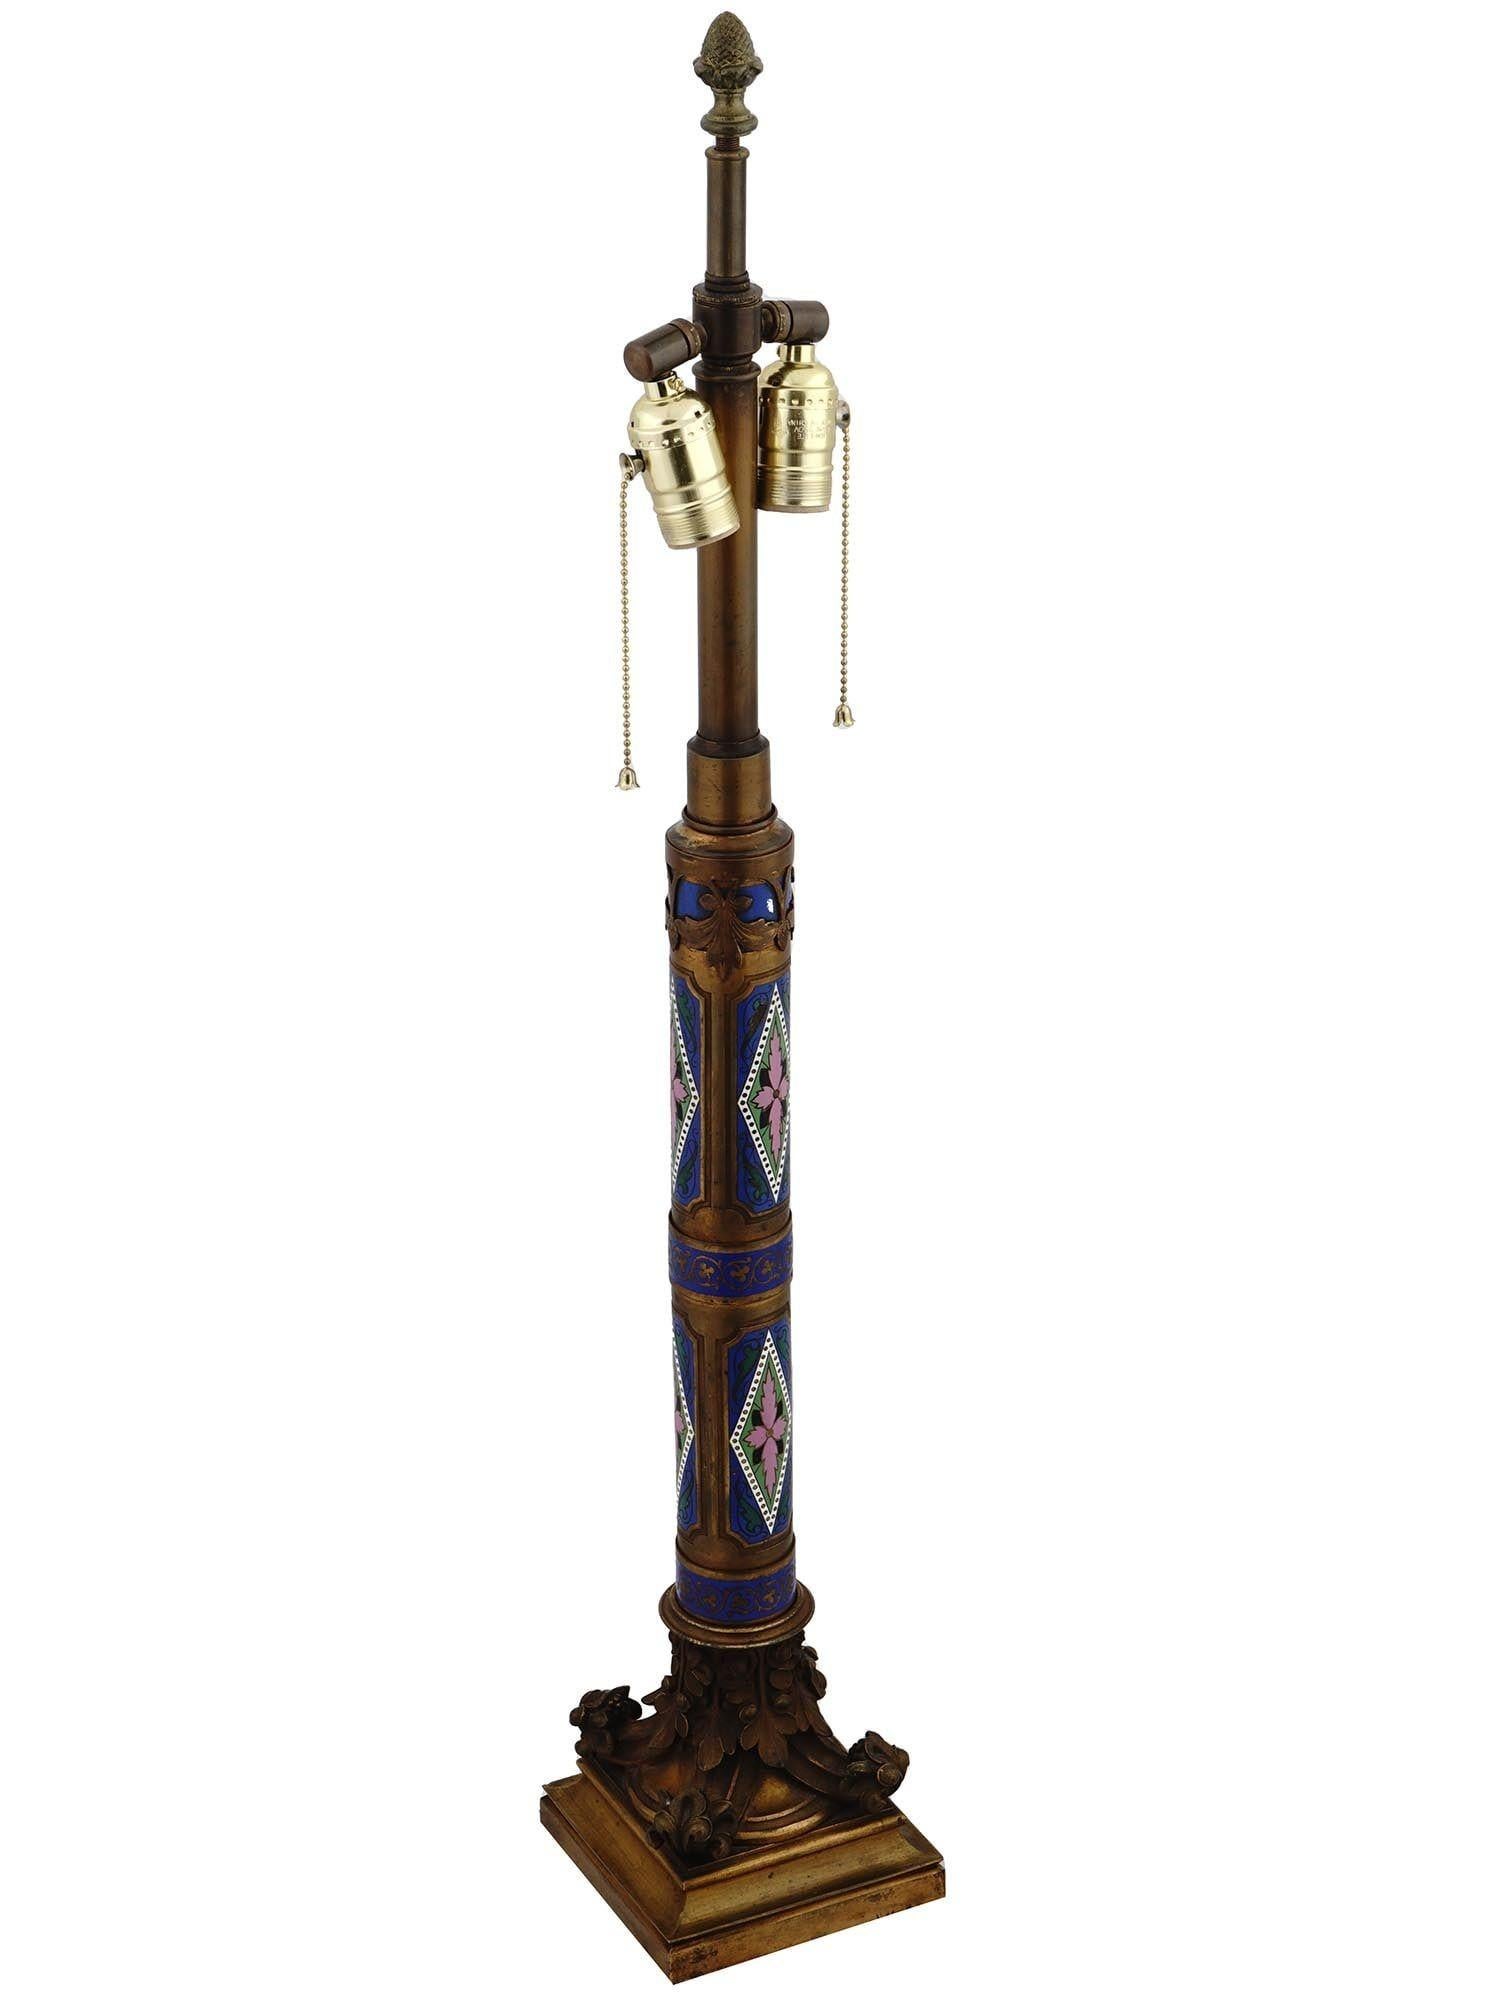 Antique Champleve Enameled Bronze Table Lamp Attributed to Caldwell  For Sale 1